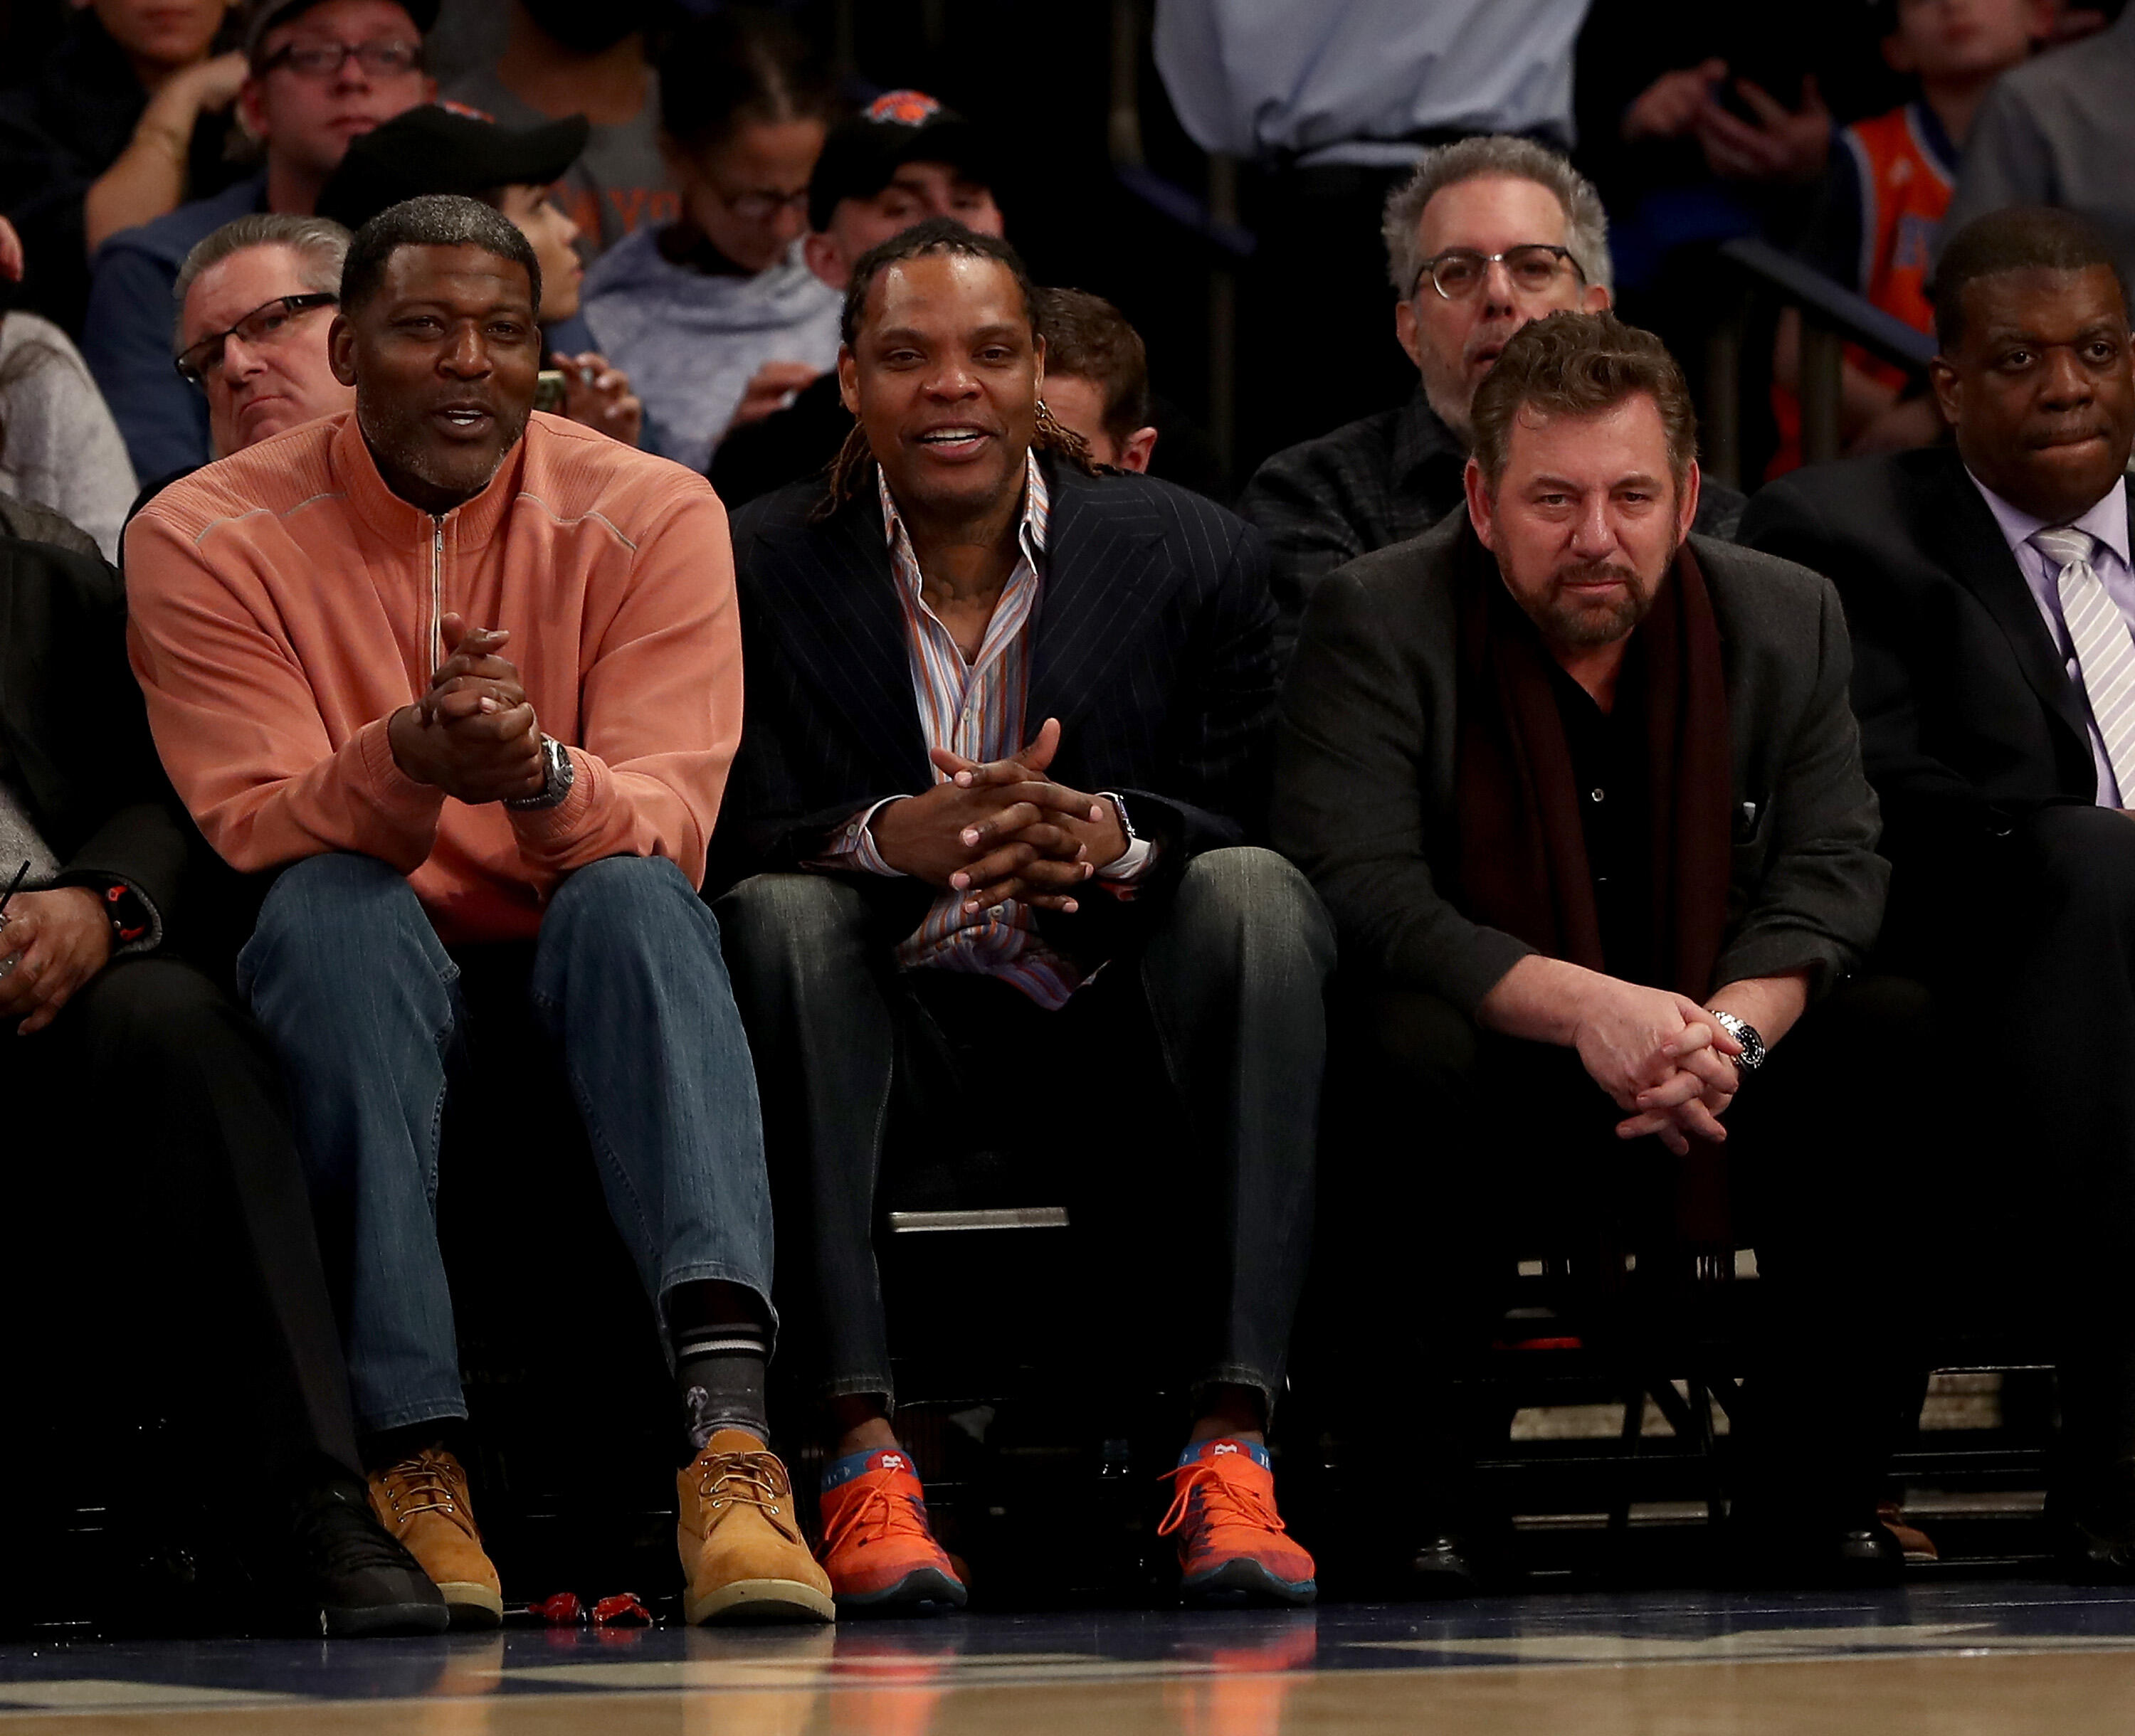 NEW YORK, NY - FEBRUARY 12:  Former New York Knicks playes Larry Johnson and Latrell Spreewell and Knicks owner James Dolan attend the game between the New York Knicks and the San Antonio Spurs at Madison Square Garden on February 12, 2017 in New York Cit